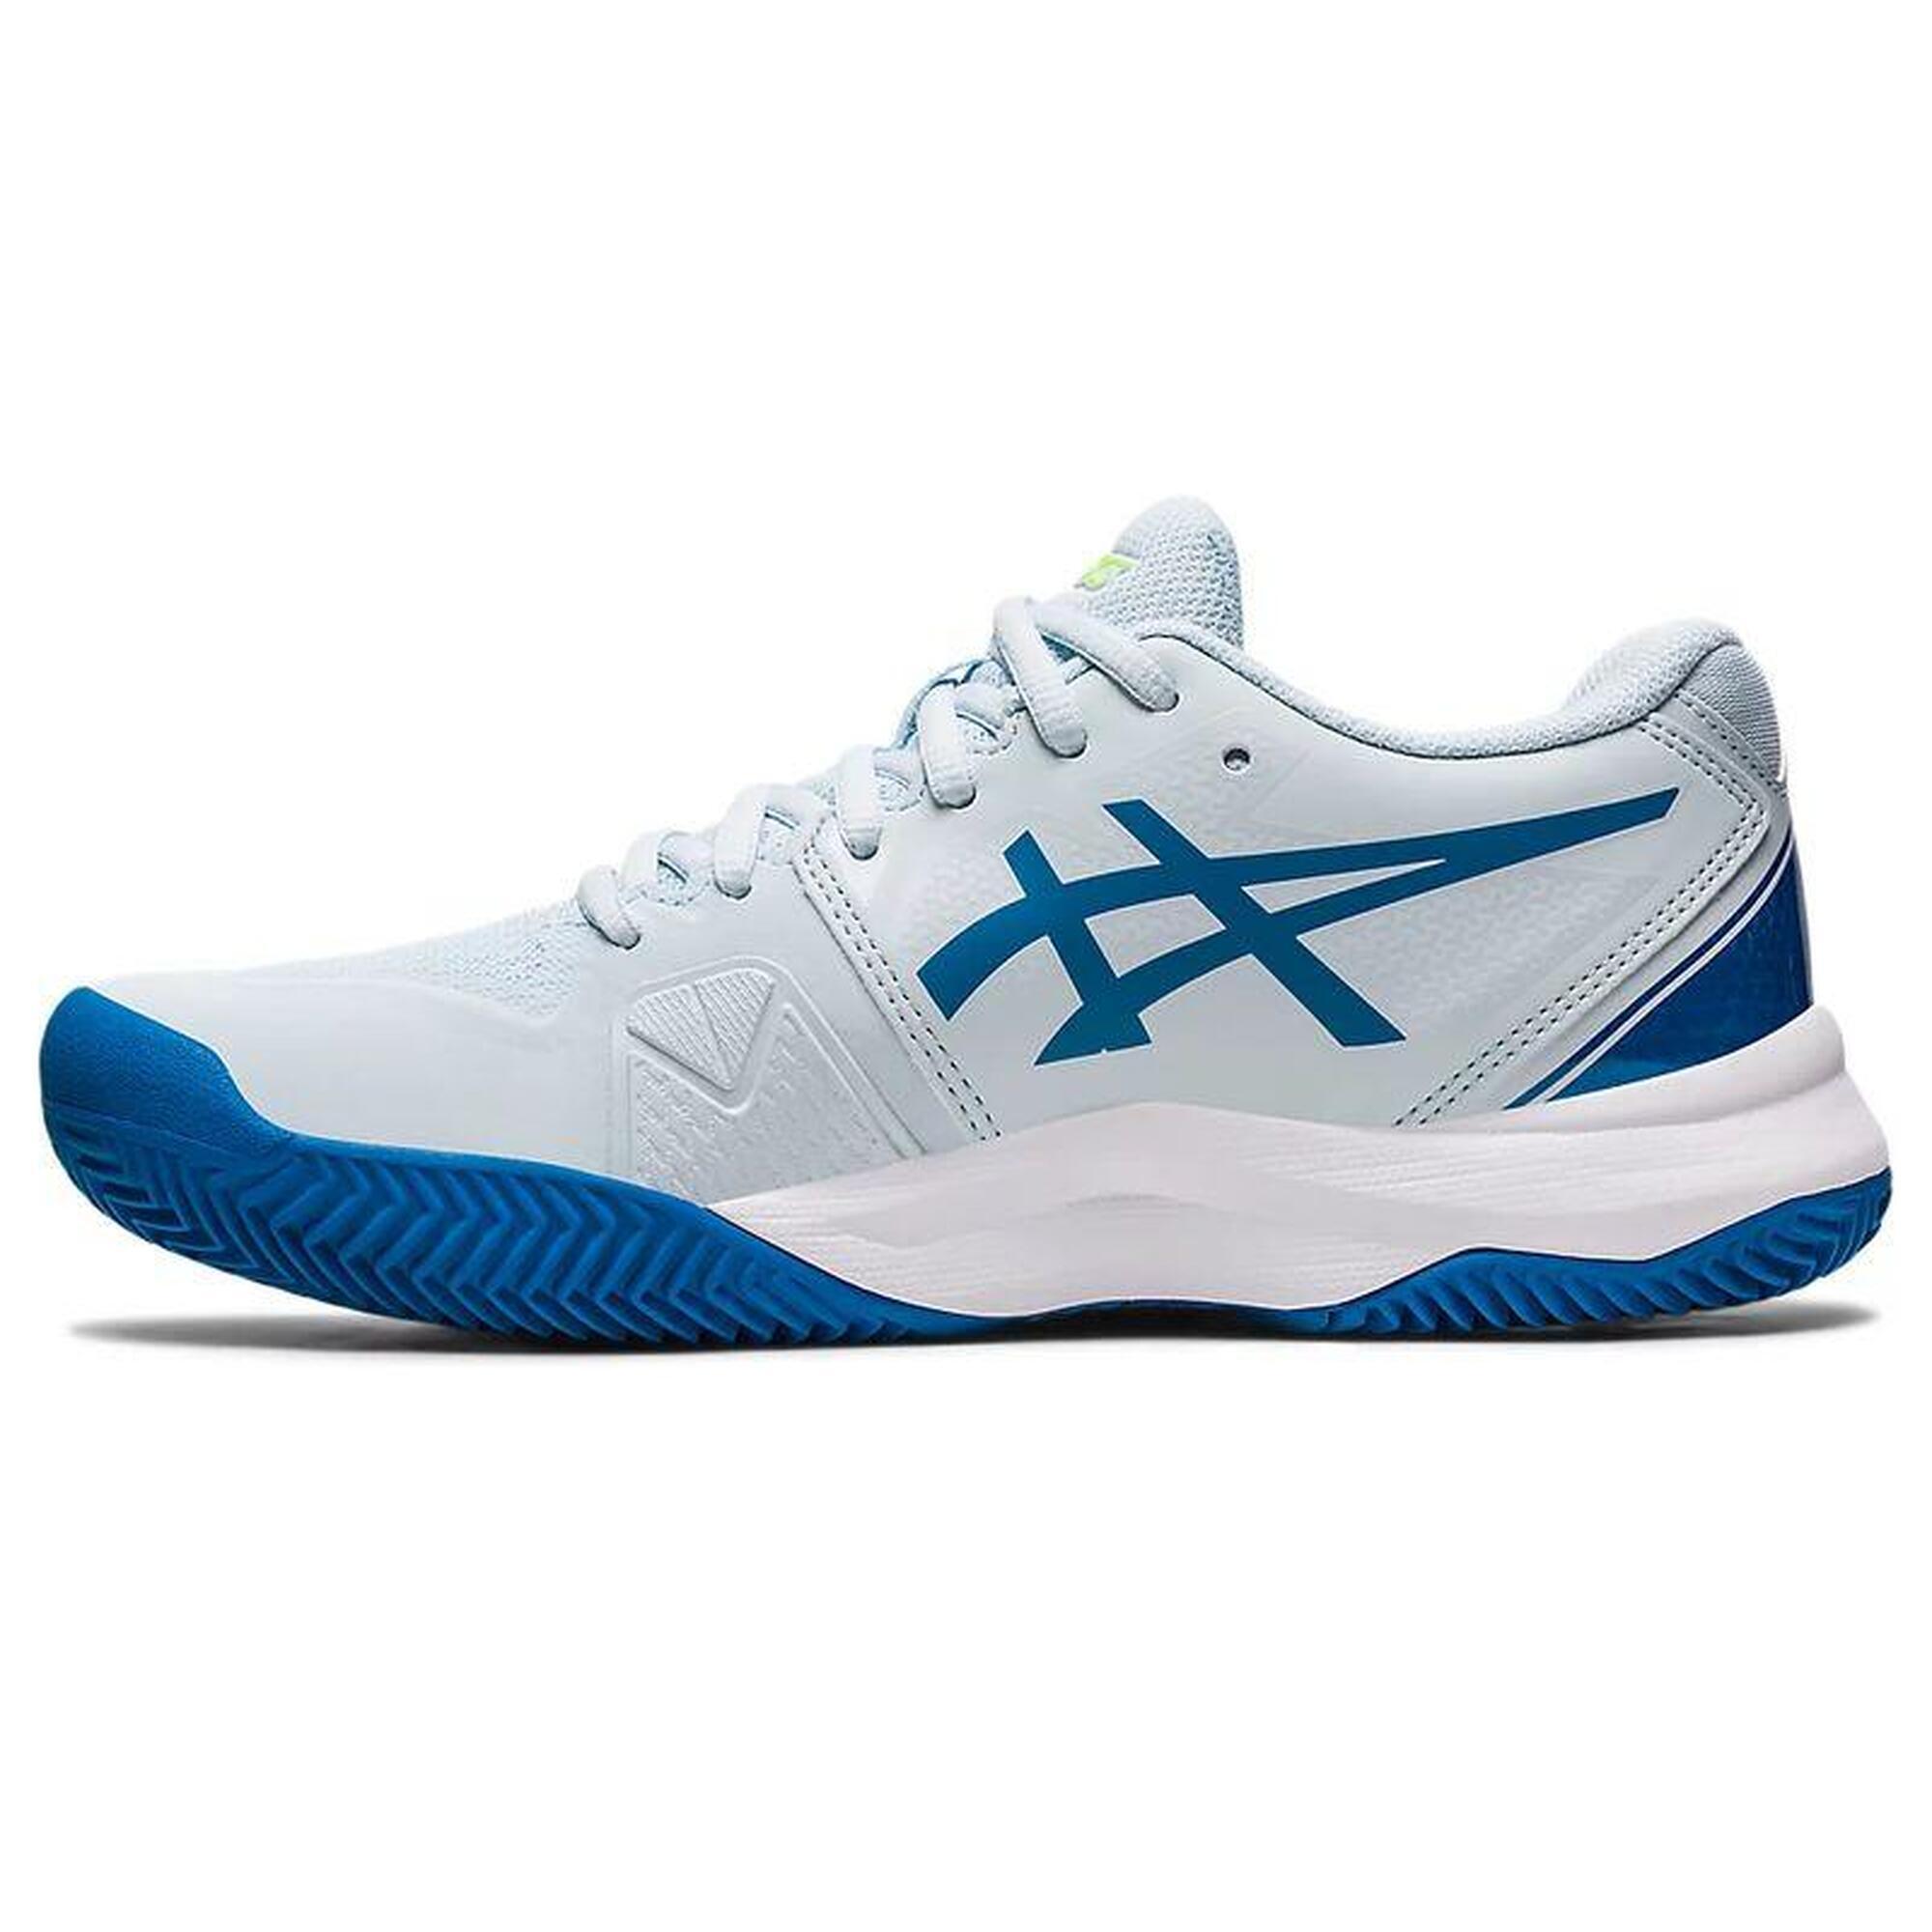 Asics Gel-challenger 13 Clay Azul Mujer 1042a165-404